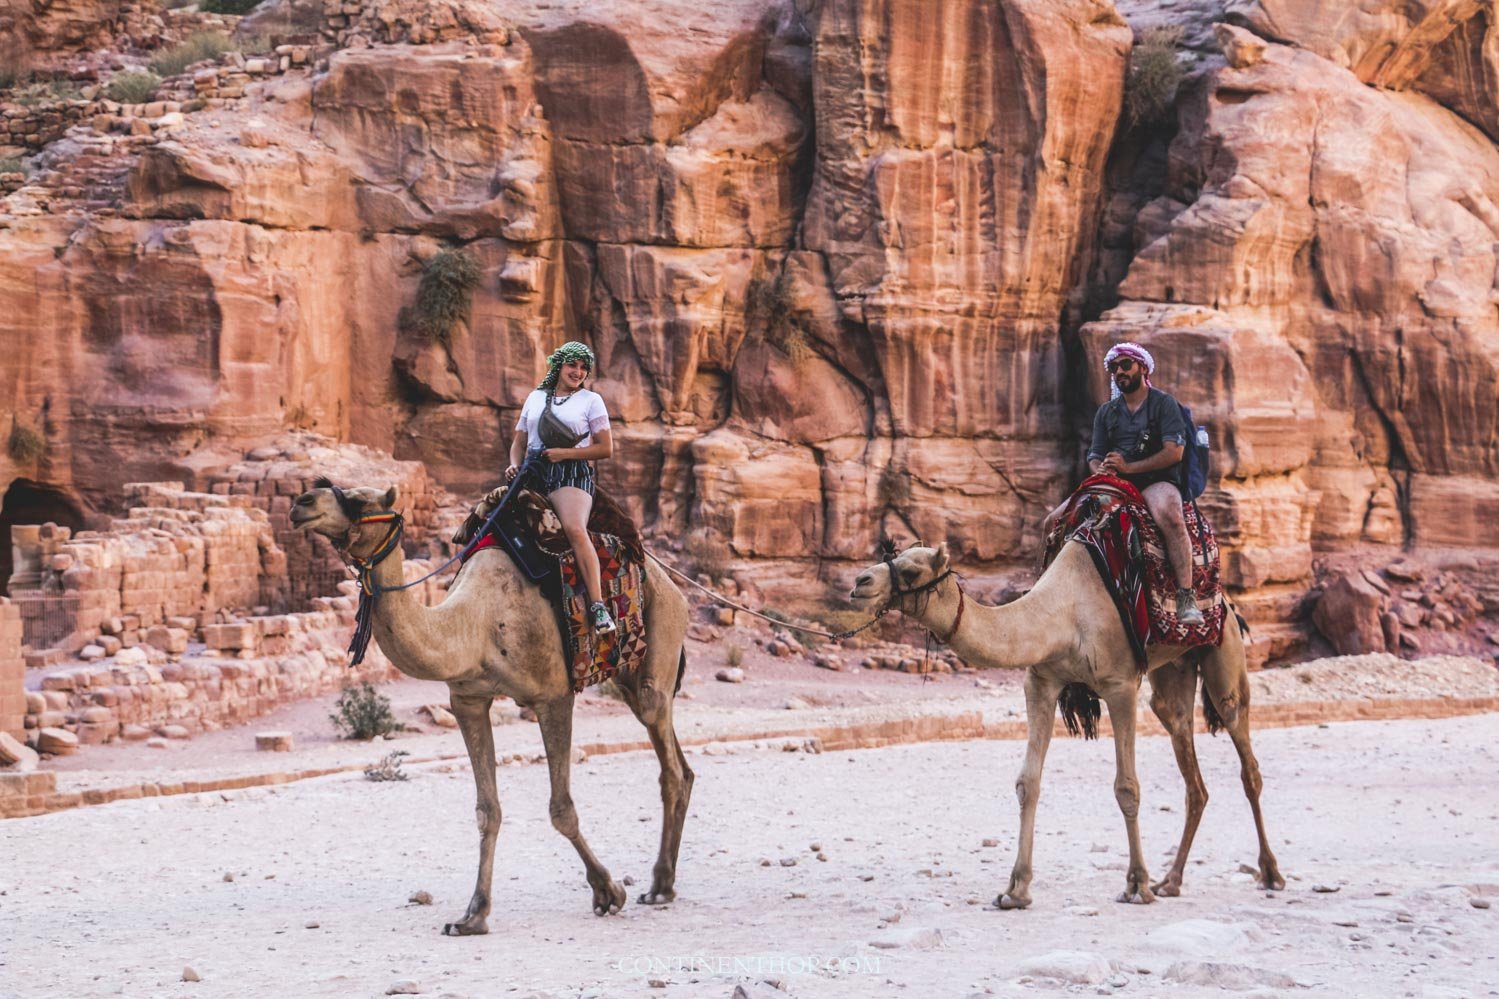 Two people on camels in Petra night tour